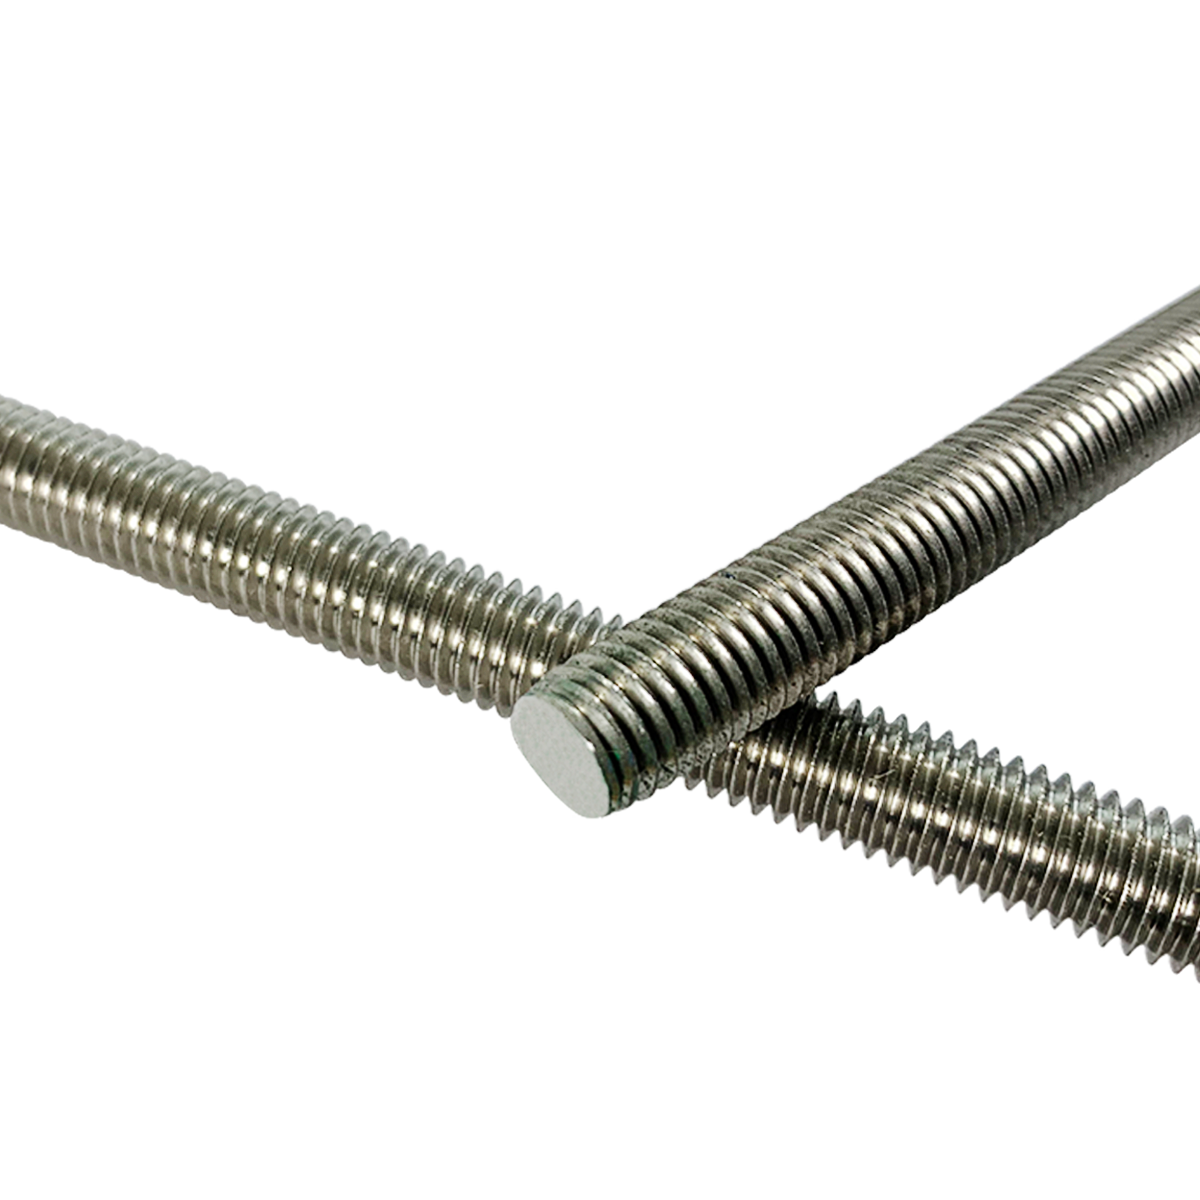 UNC, A2 stainless steel threaded bar, known as threaded rod or studding, is available in various sizes and at competitive prices with Fusion Fixings